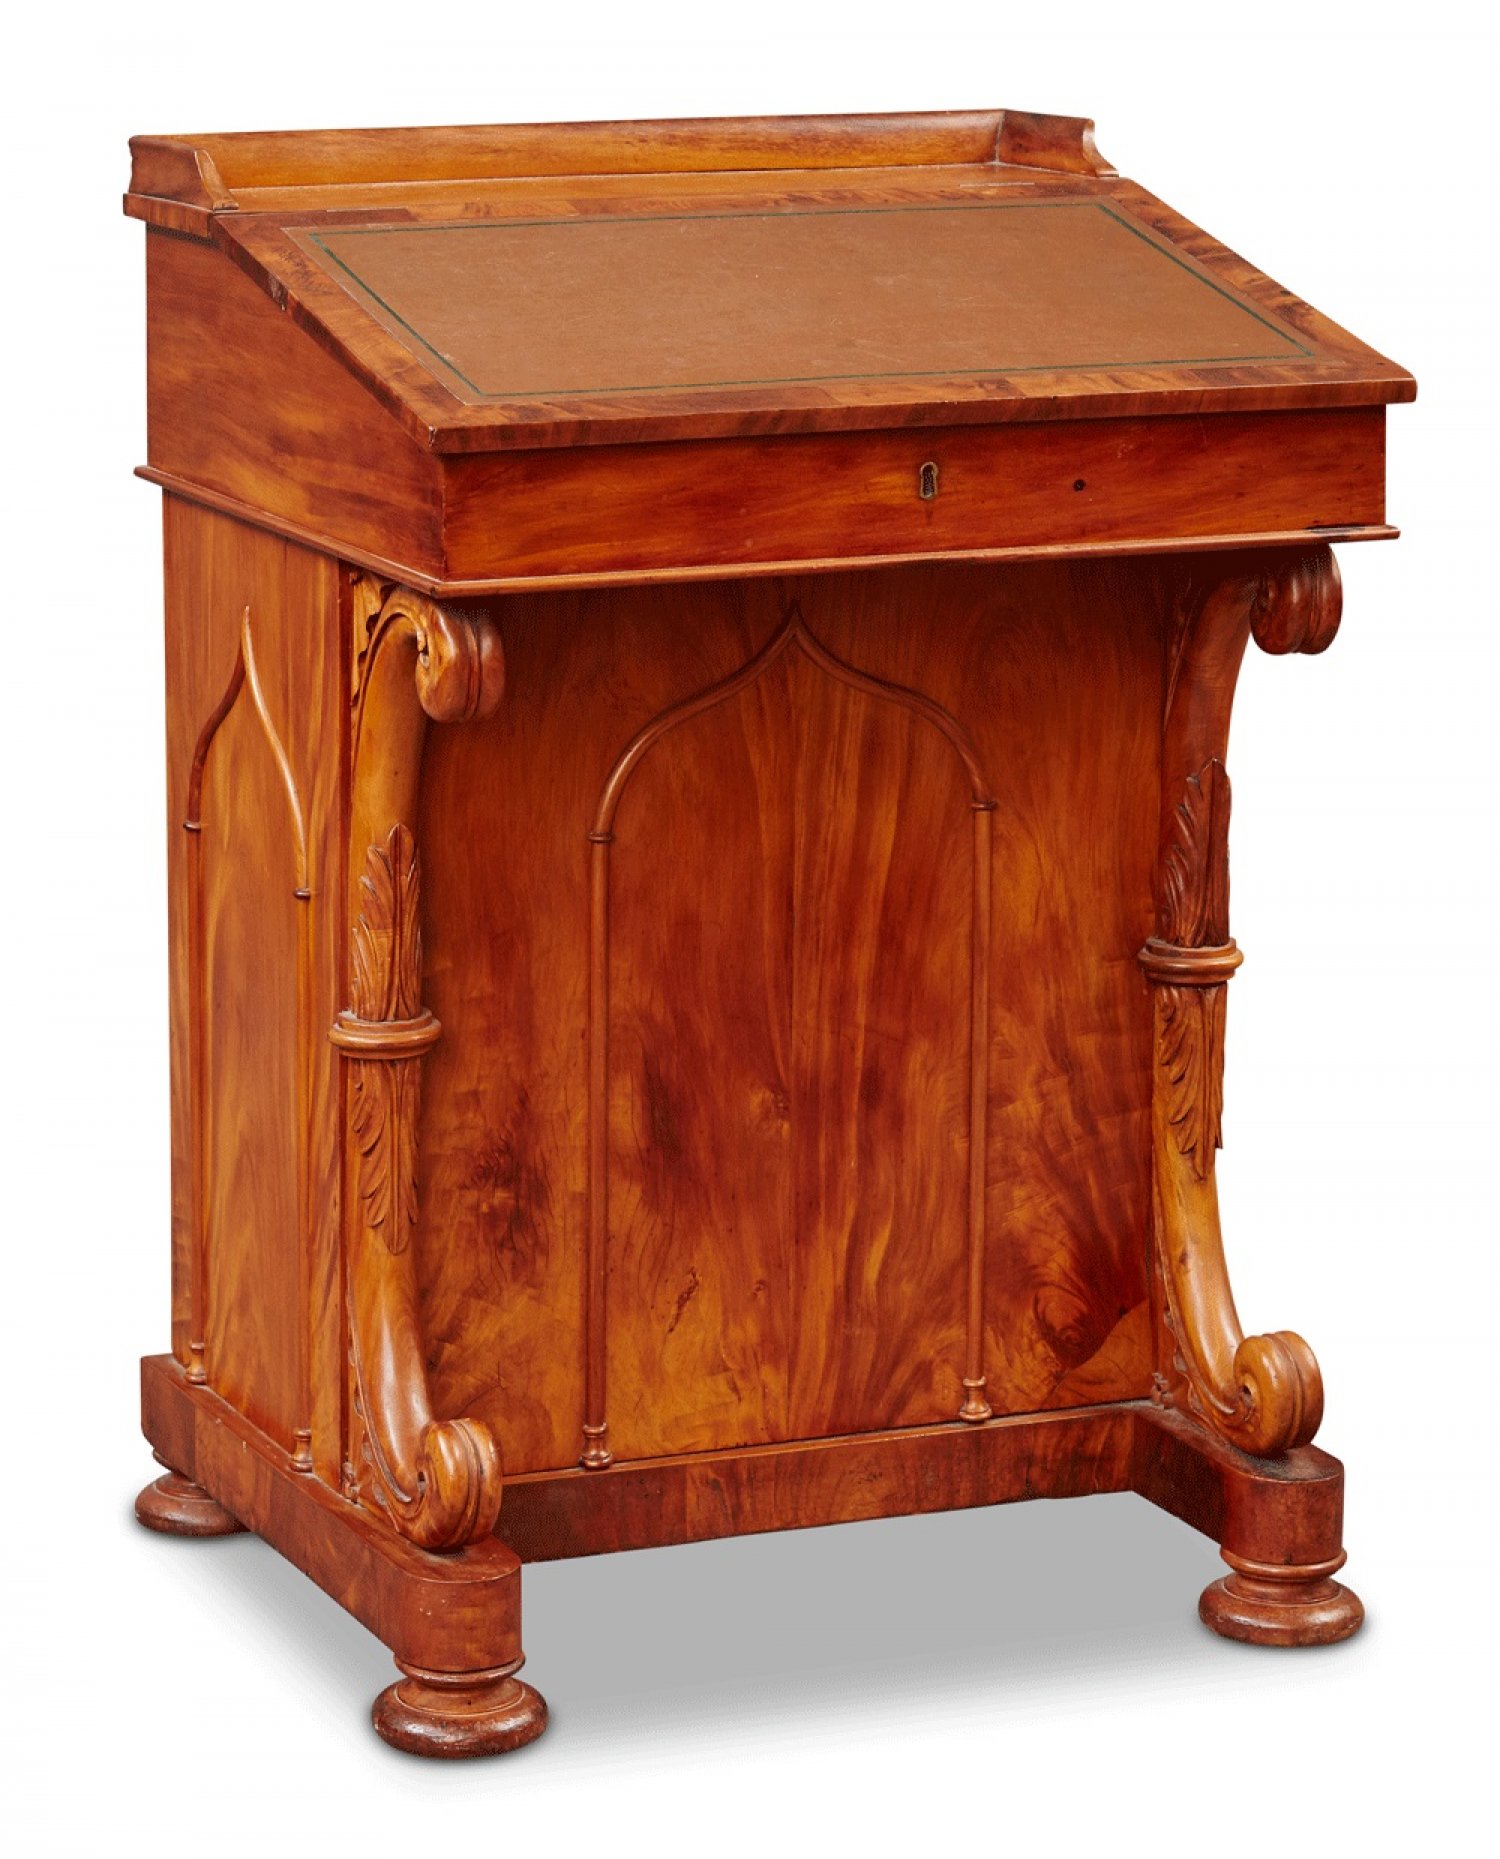 Rare 19th Century Satinwood Fitted Davenport.